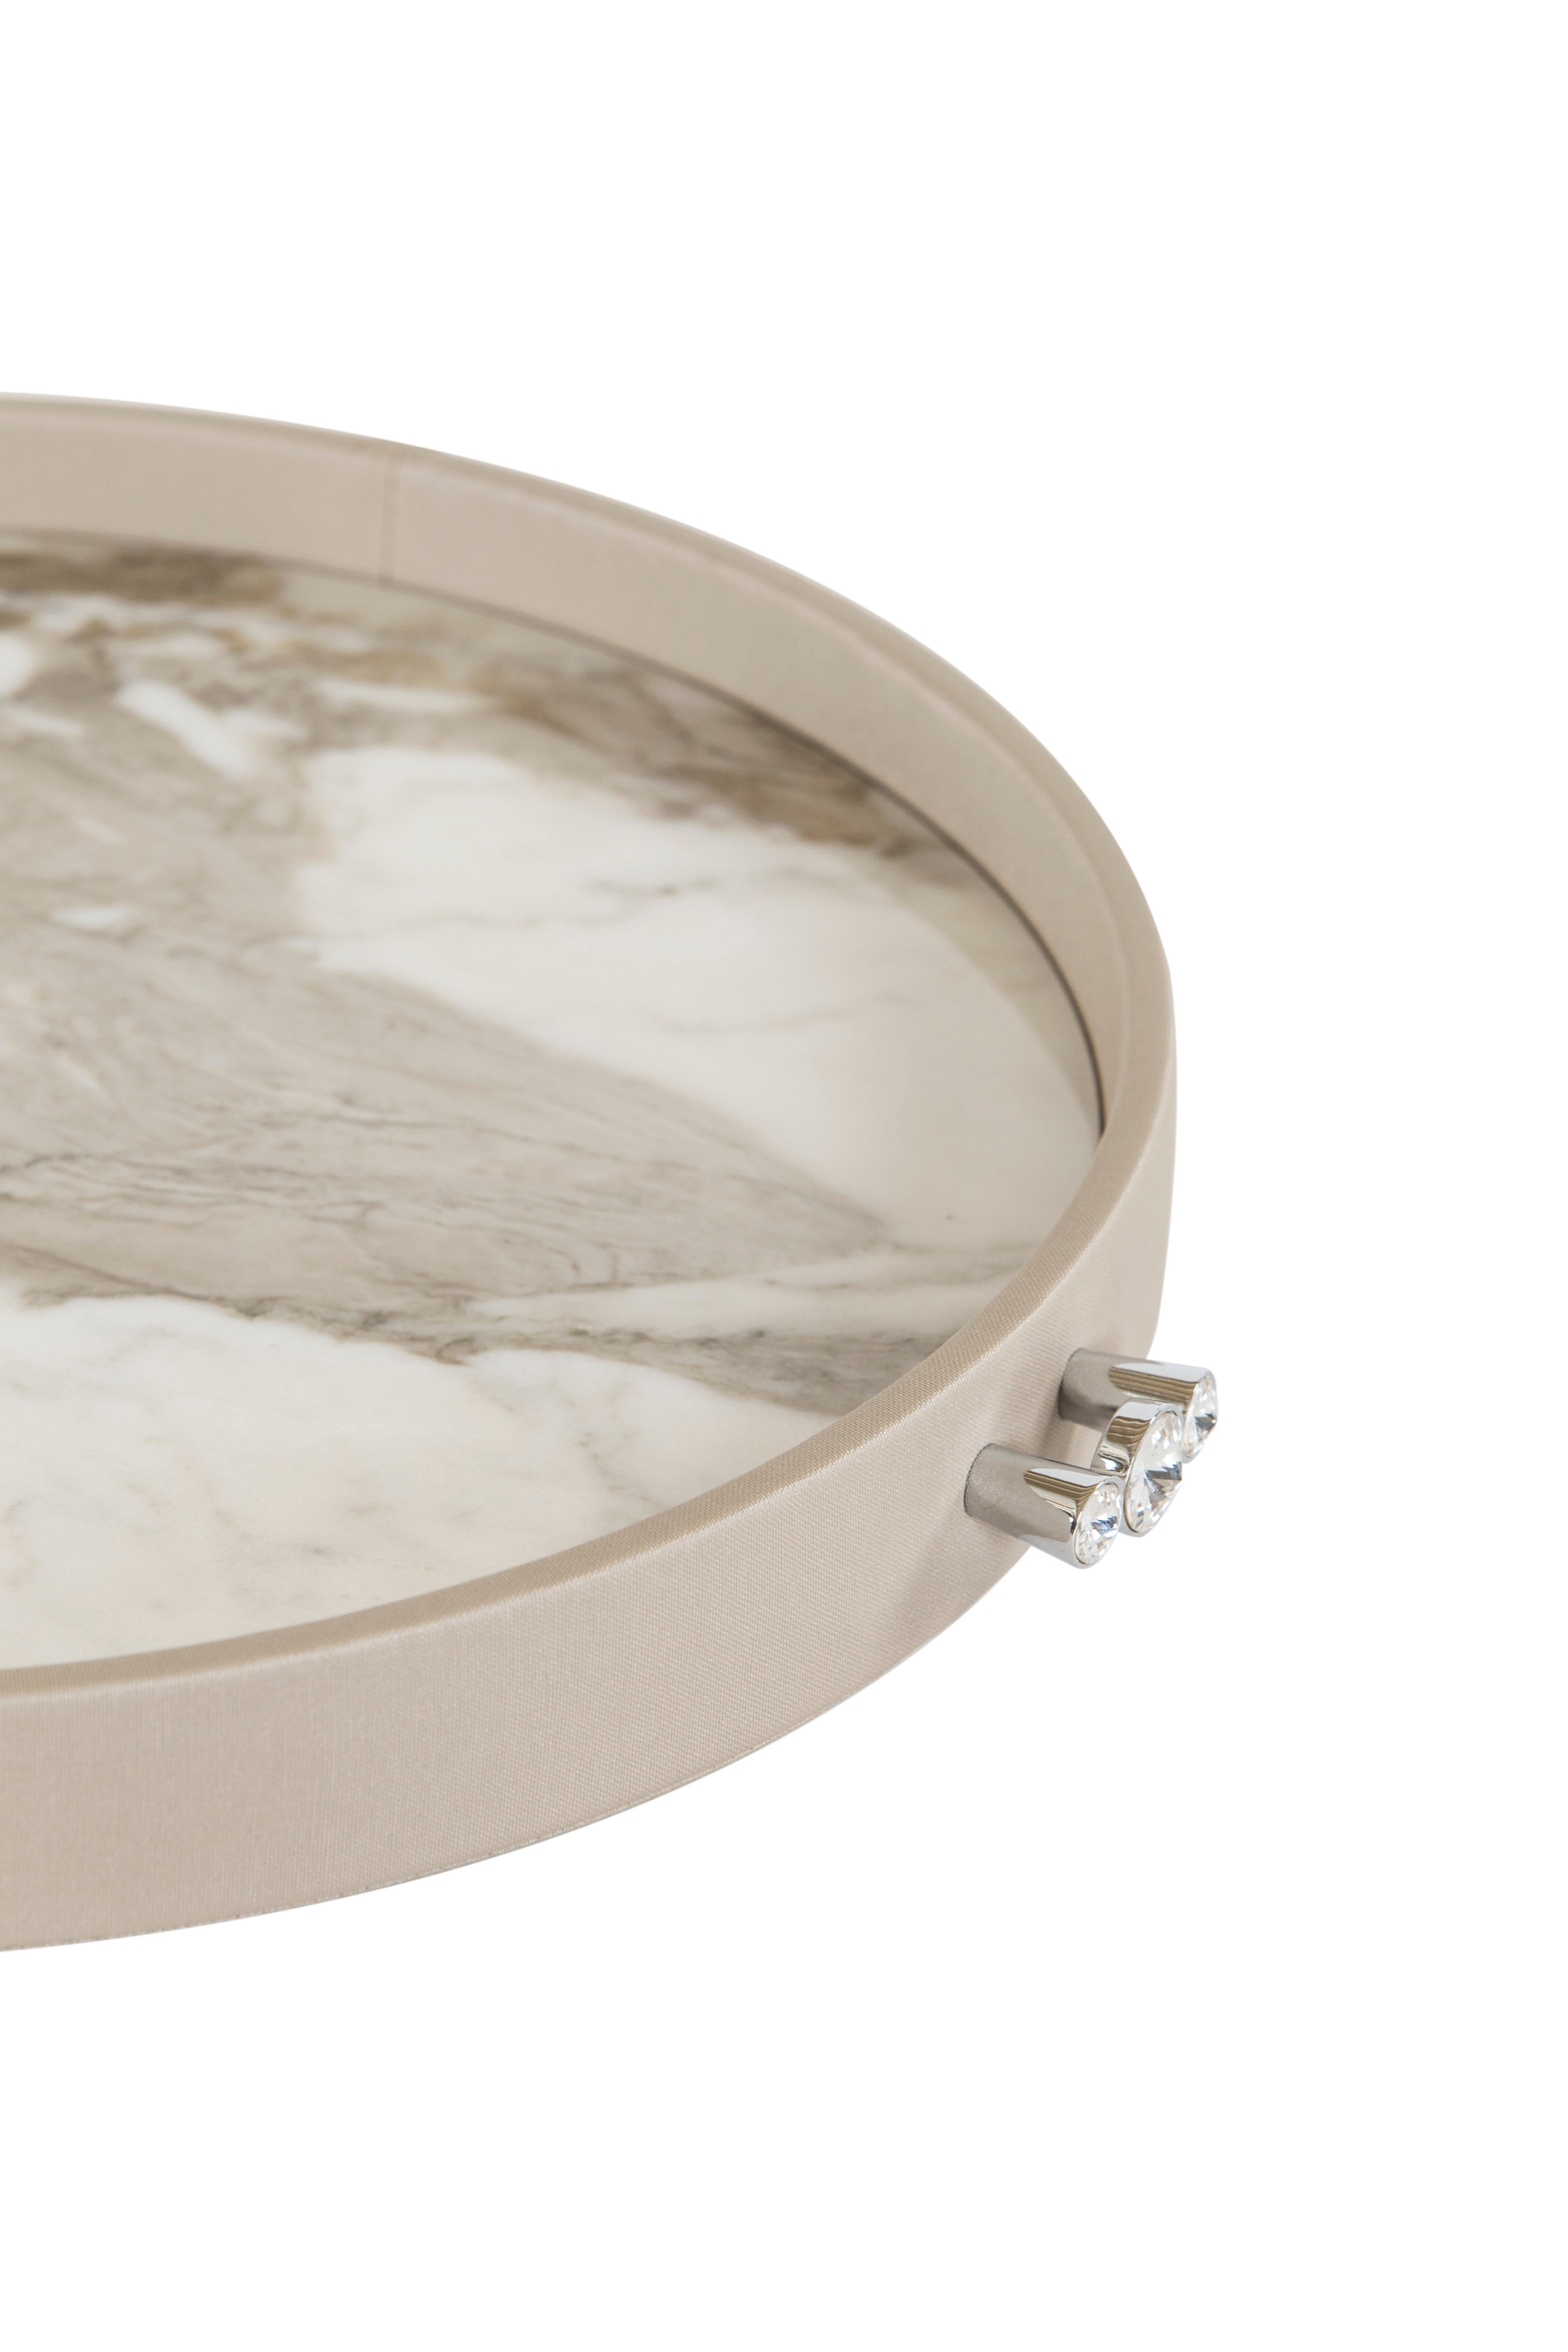 Serving tray Alentejo, Lusitanus Home Collection, handcrafted in Portugal - Europe by Lusitanus Home.

A sublime serving tray, Alentejo was designed to uplift layback moments.
A round serving tray in Calacatta Cremo marble with chrome handles with